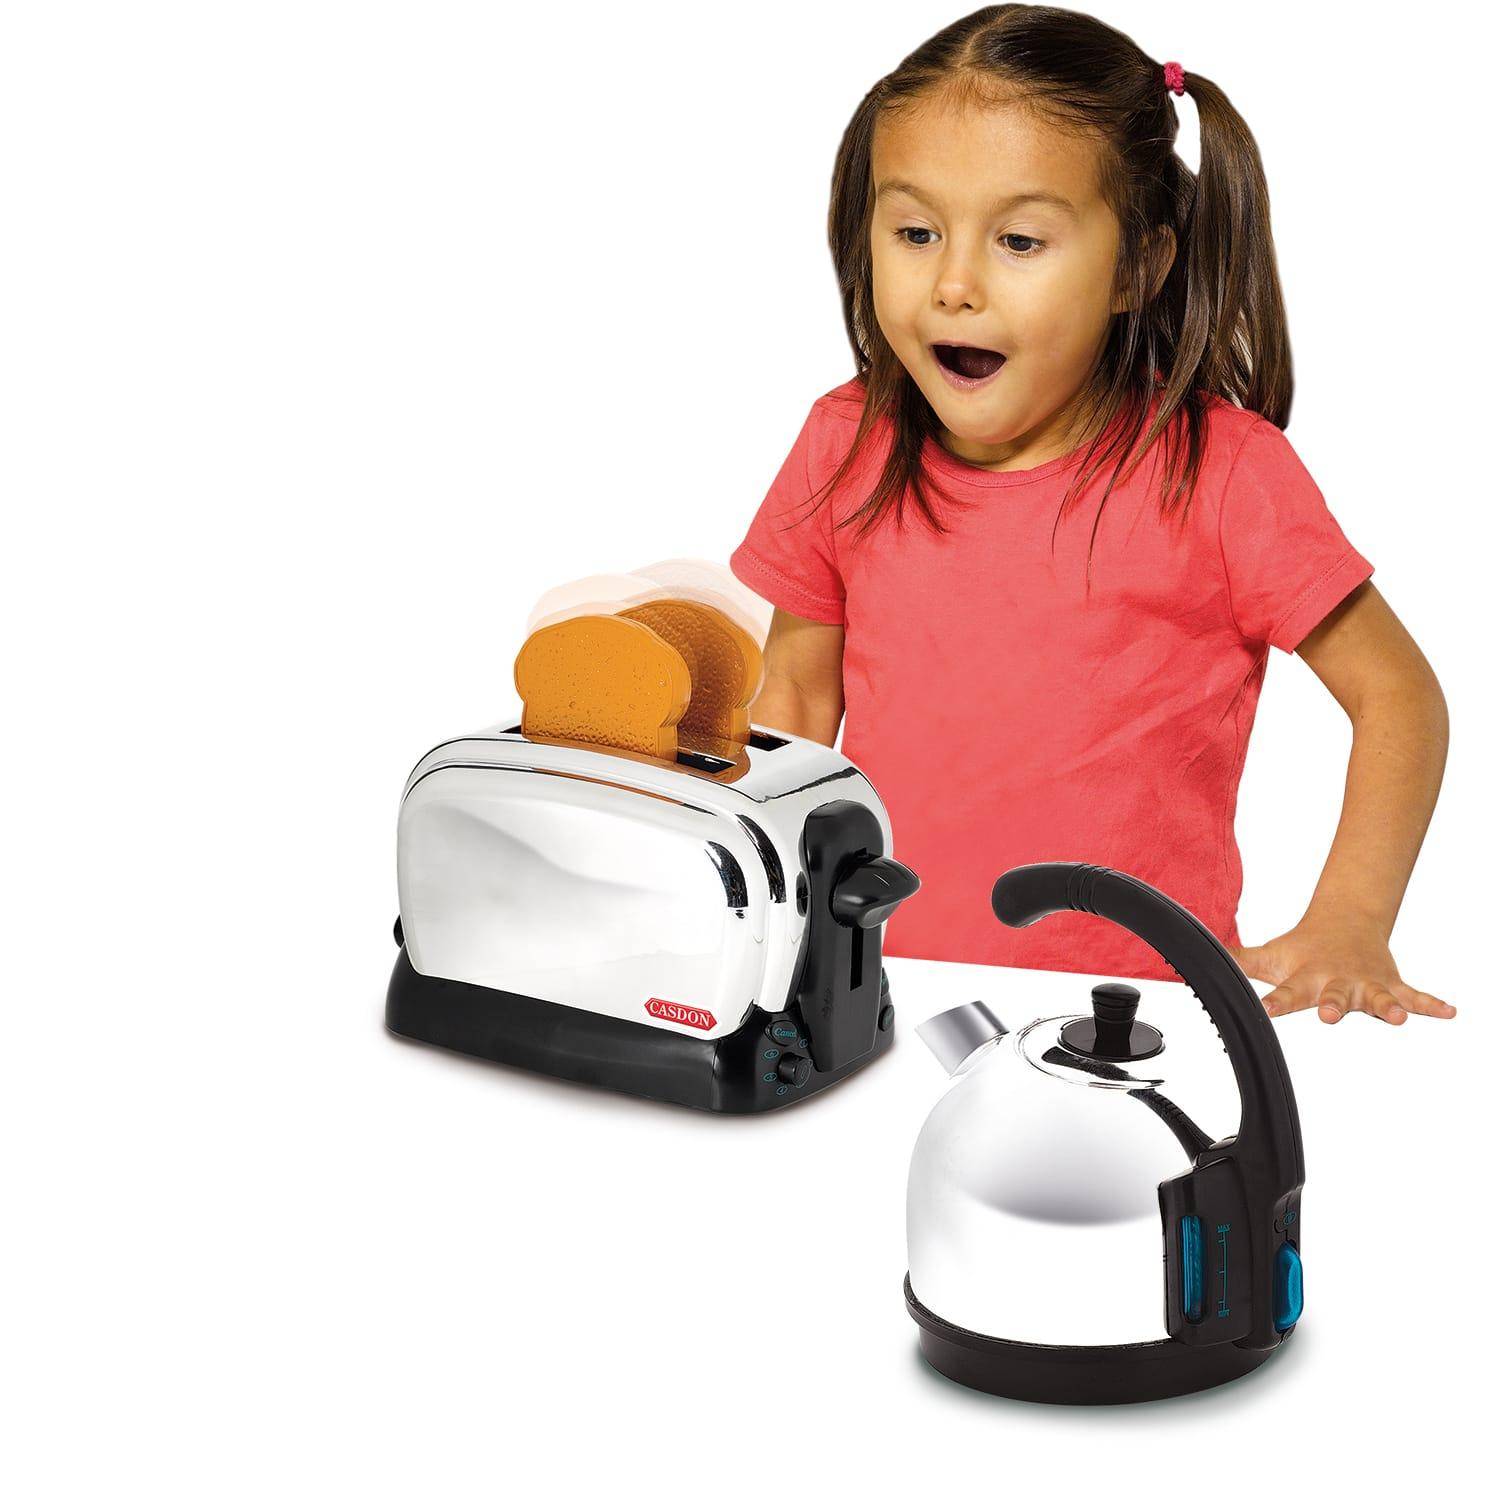 Morphy Richards Kettle & Toaster Play Set Toy Toast Lets Pretend Kitchen Set NEW